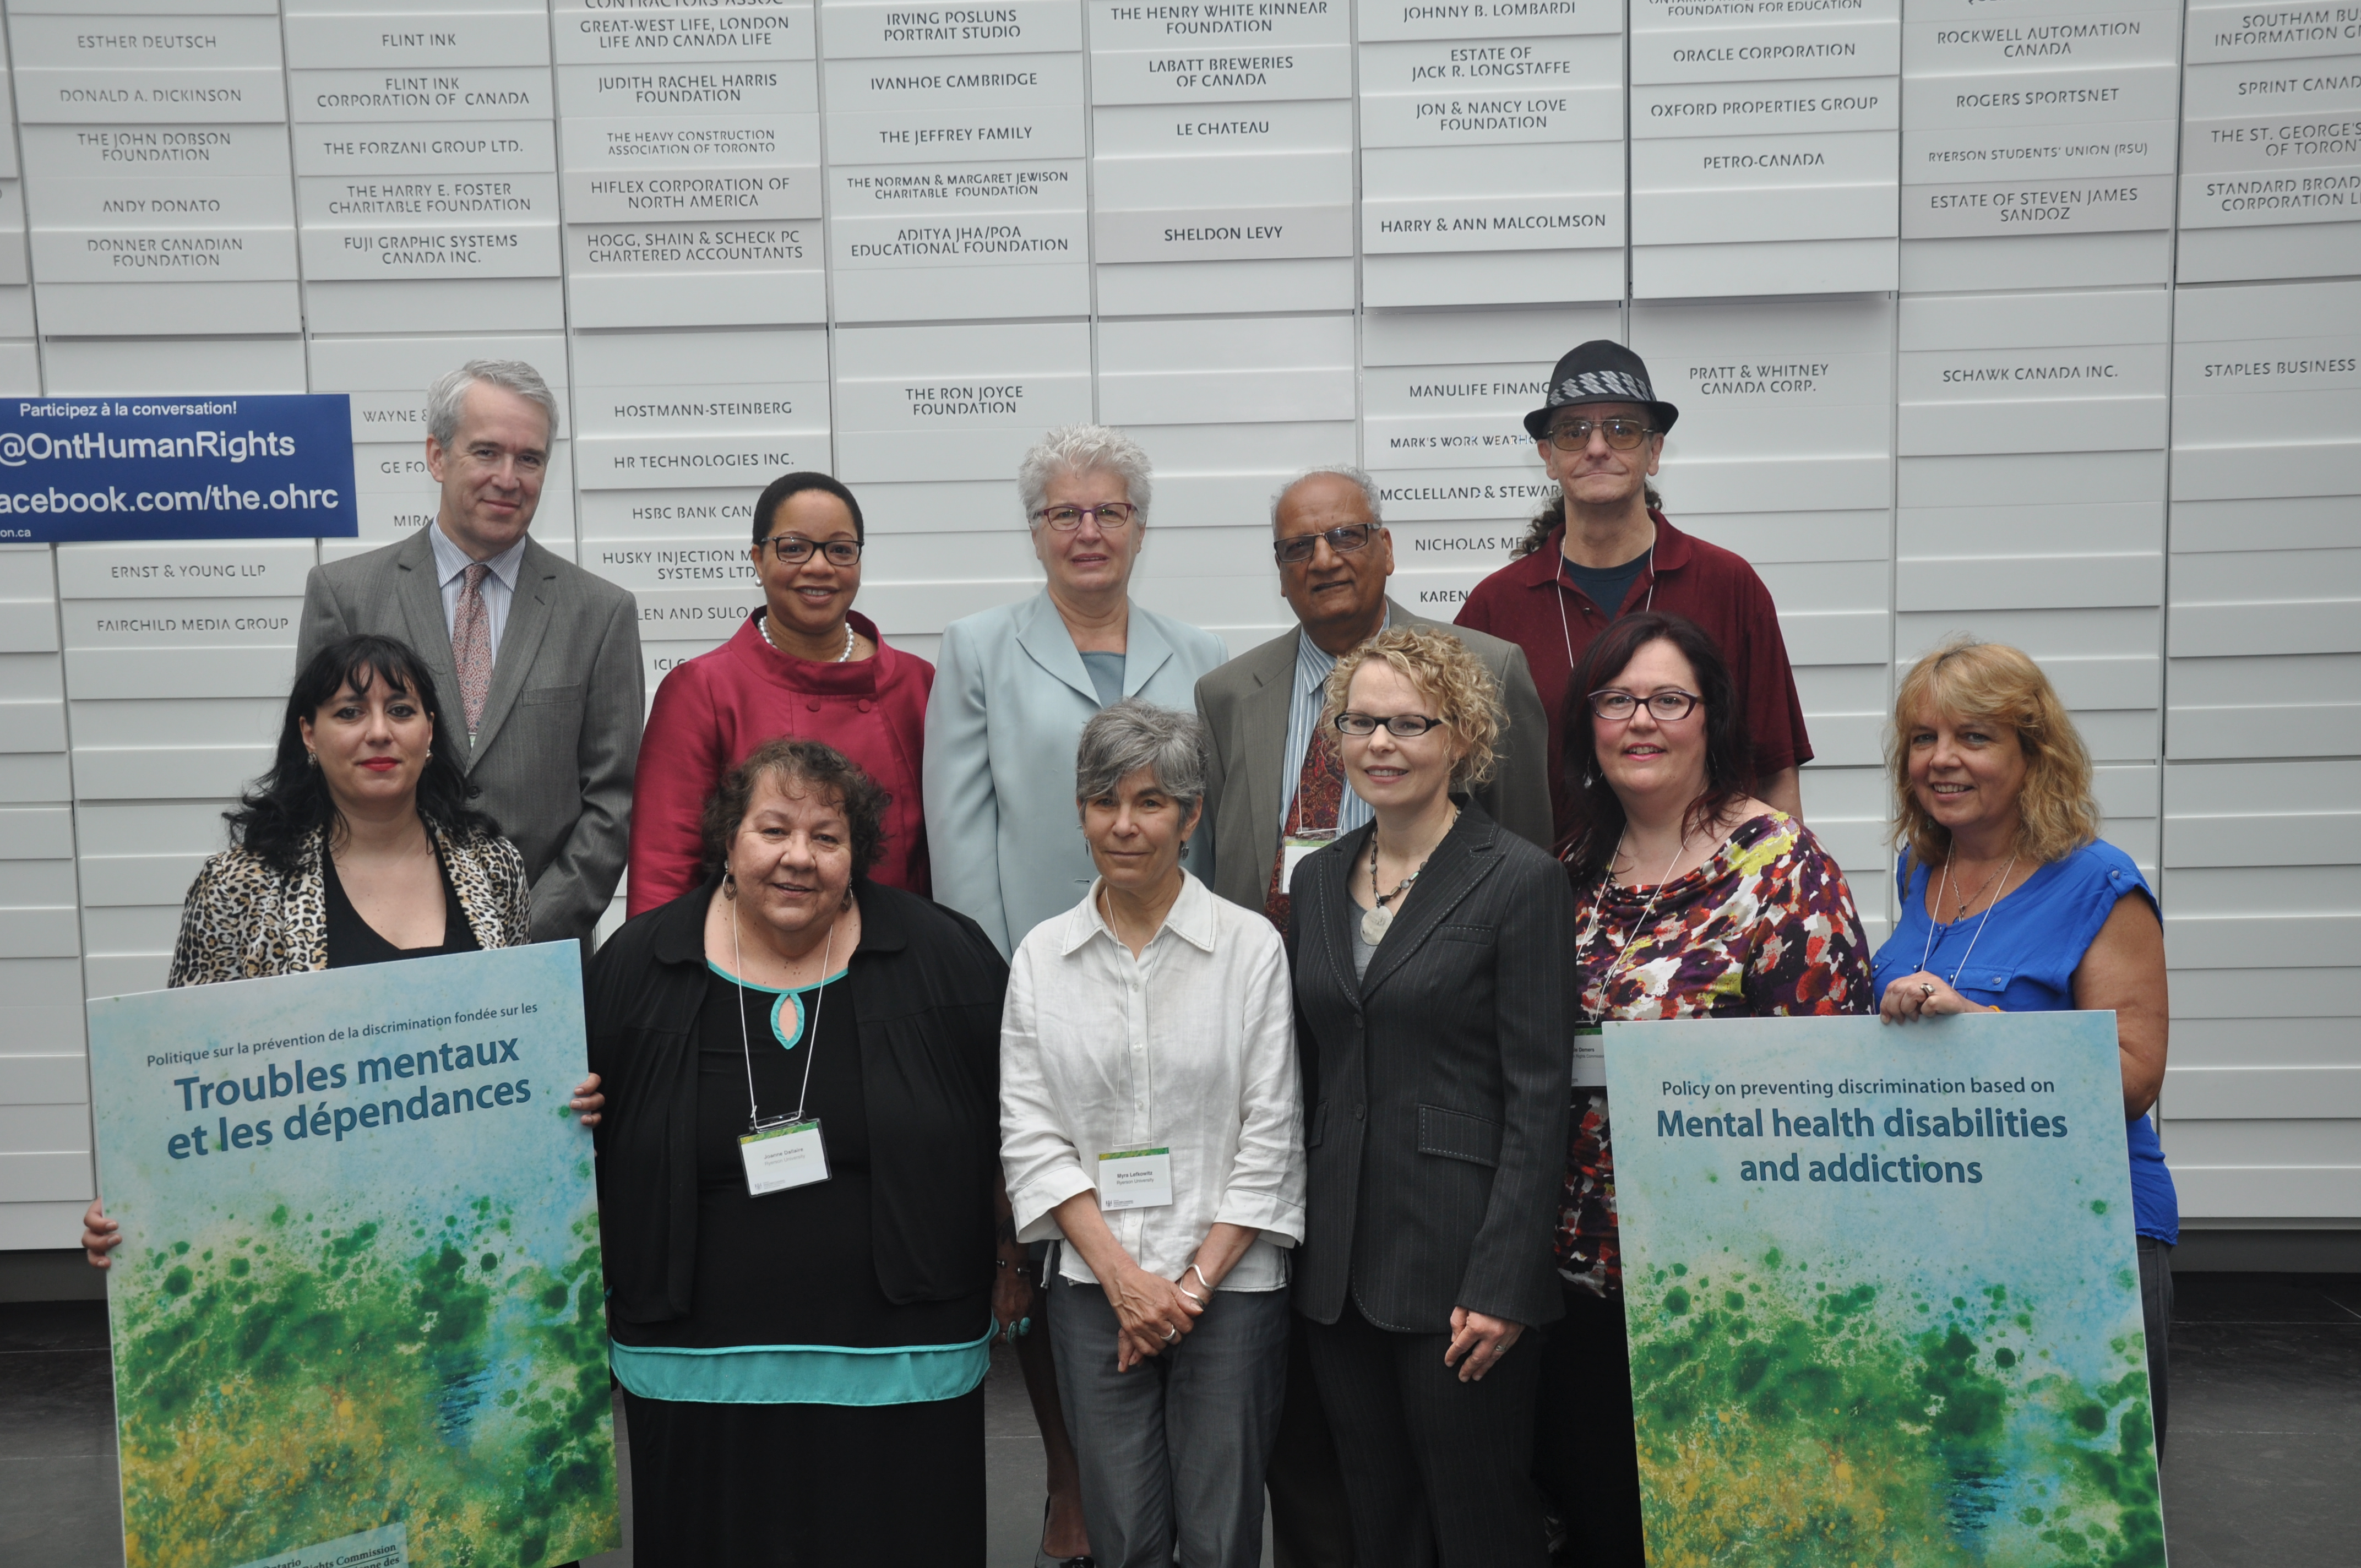 Speakers at the launch of the OHRC’s Policy on preventing discrimination based on mental health disabilities and addictions at Ryerson University stand together, holding posters of the policy cover.